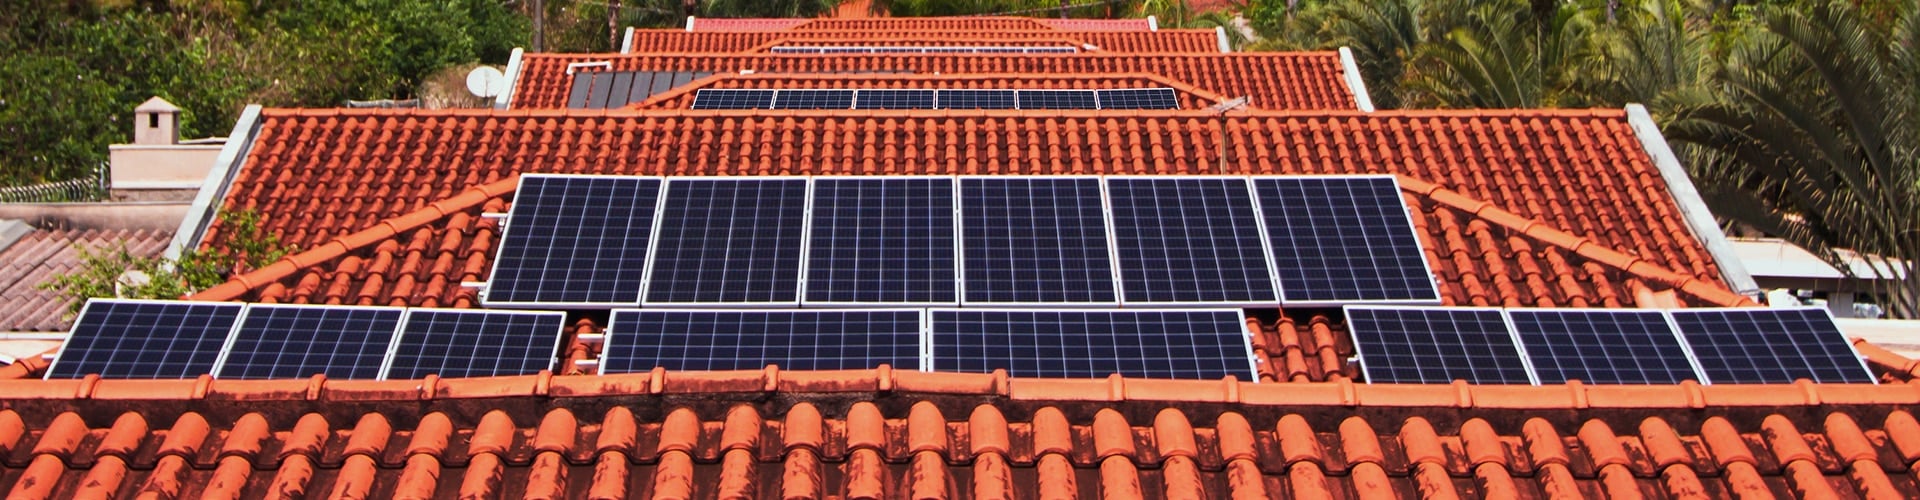 Big System, Bigger Savings: The Benefits of a 13.2kW Solar PV System in Australia